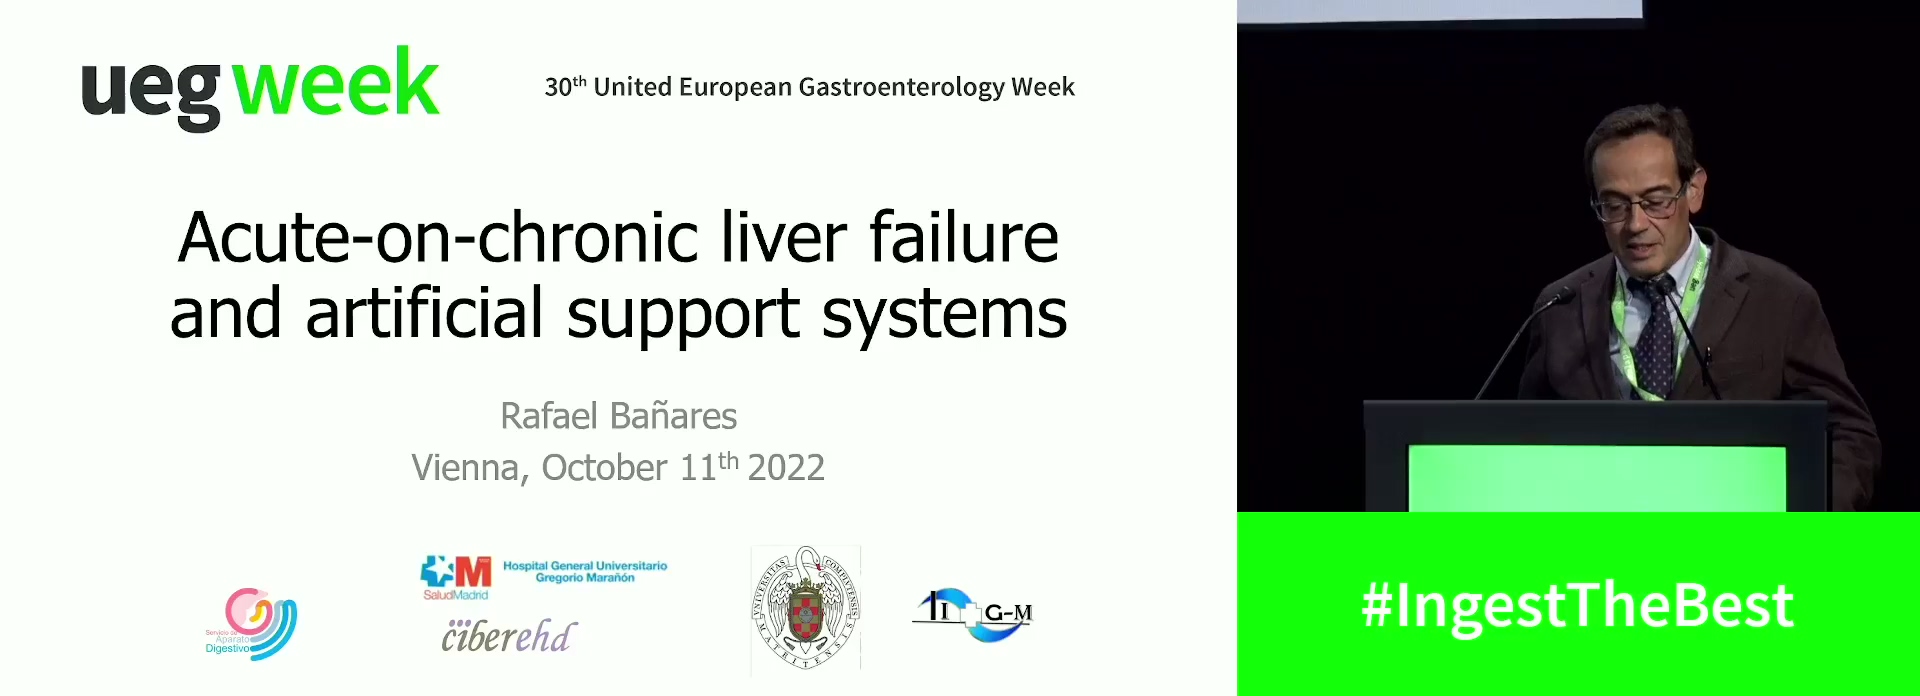 Acute-on-chronic liver failure and artificial support systems